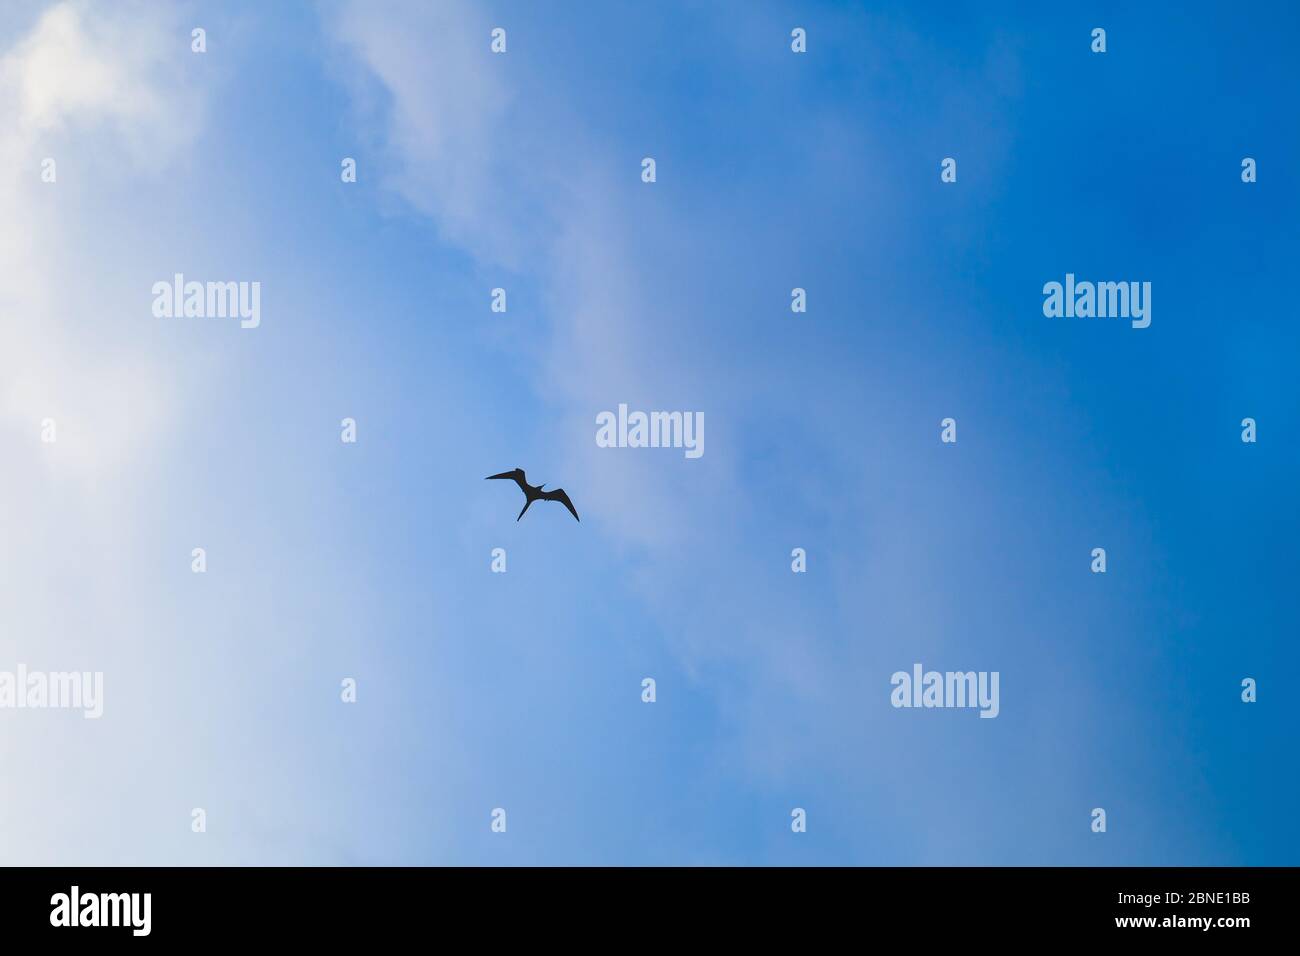 Silhouette of frigate bird flying in the sky, Dominican Republic nature Stock Photo